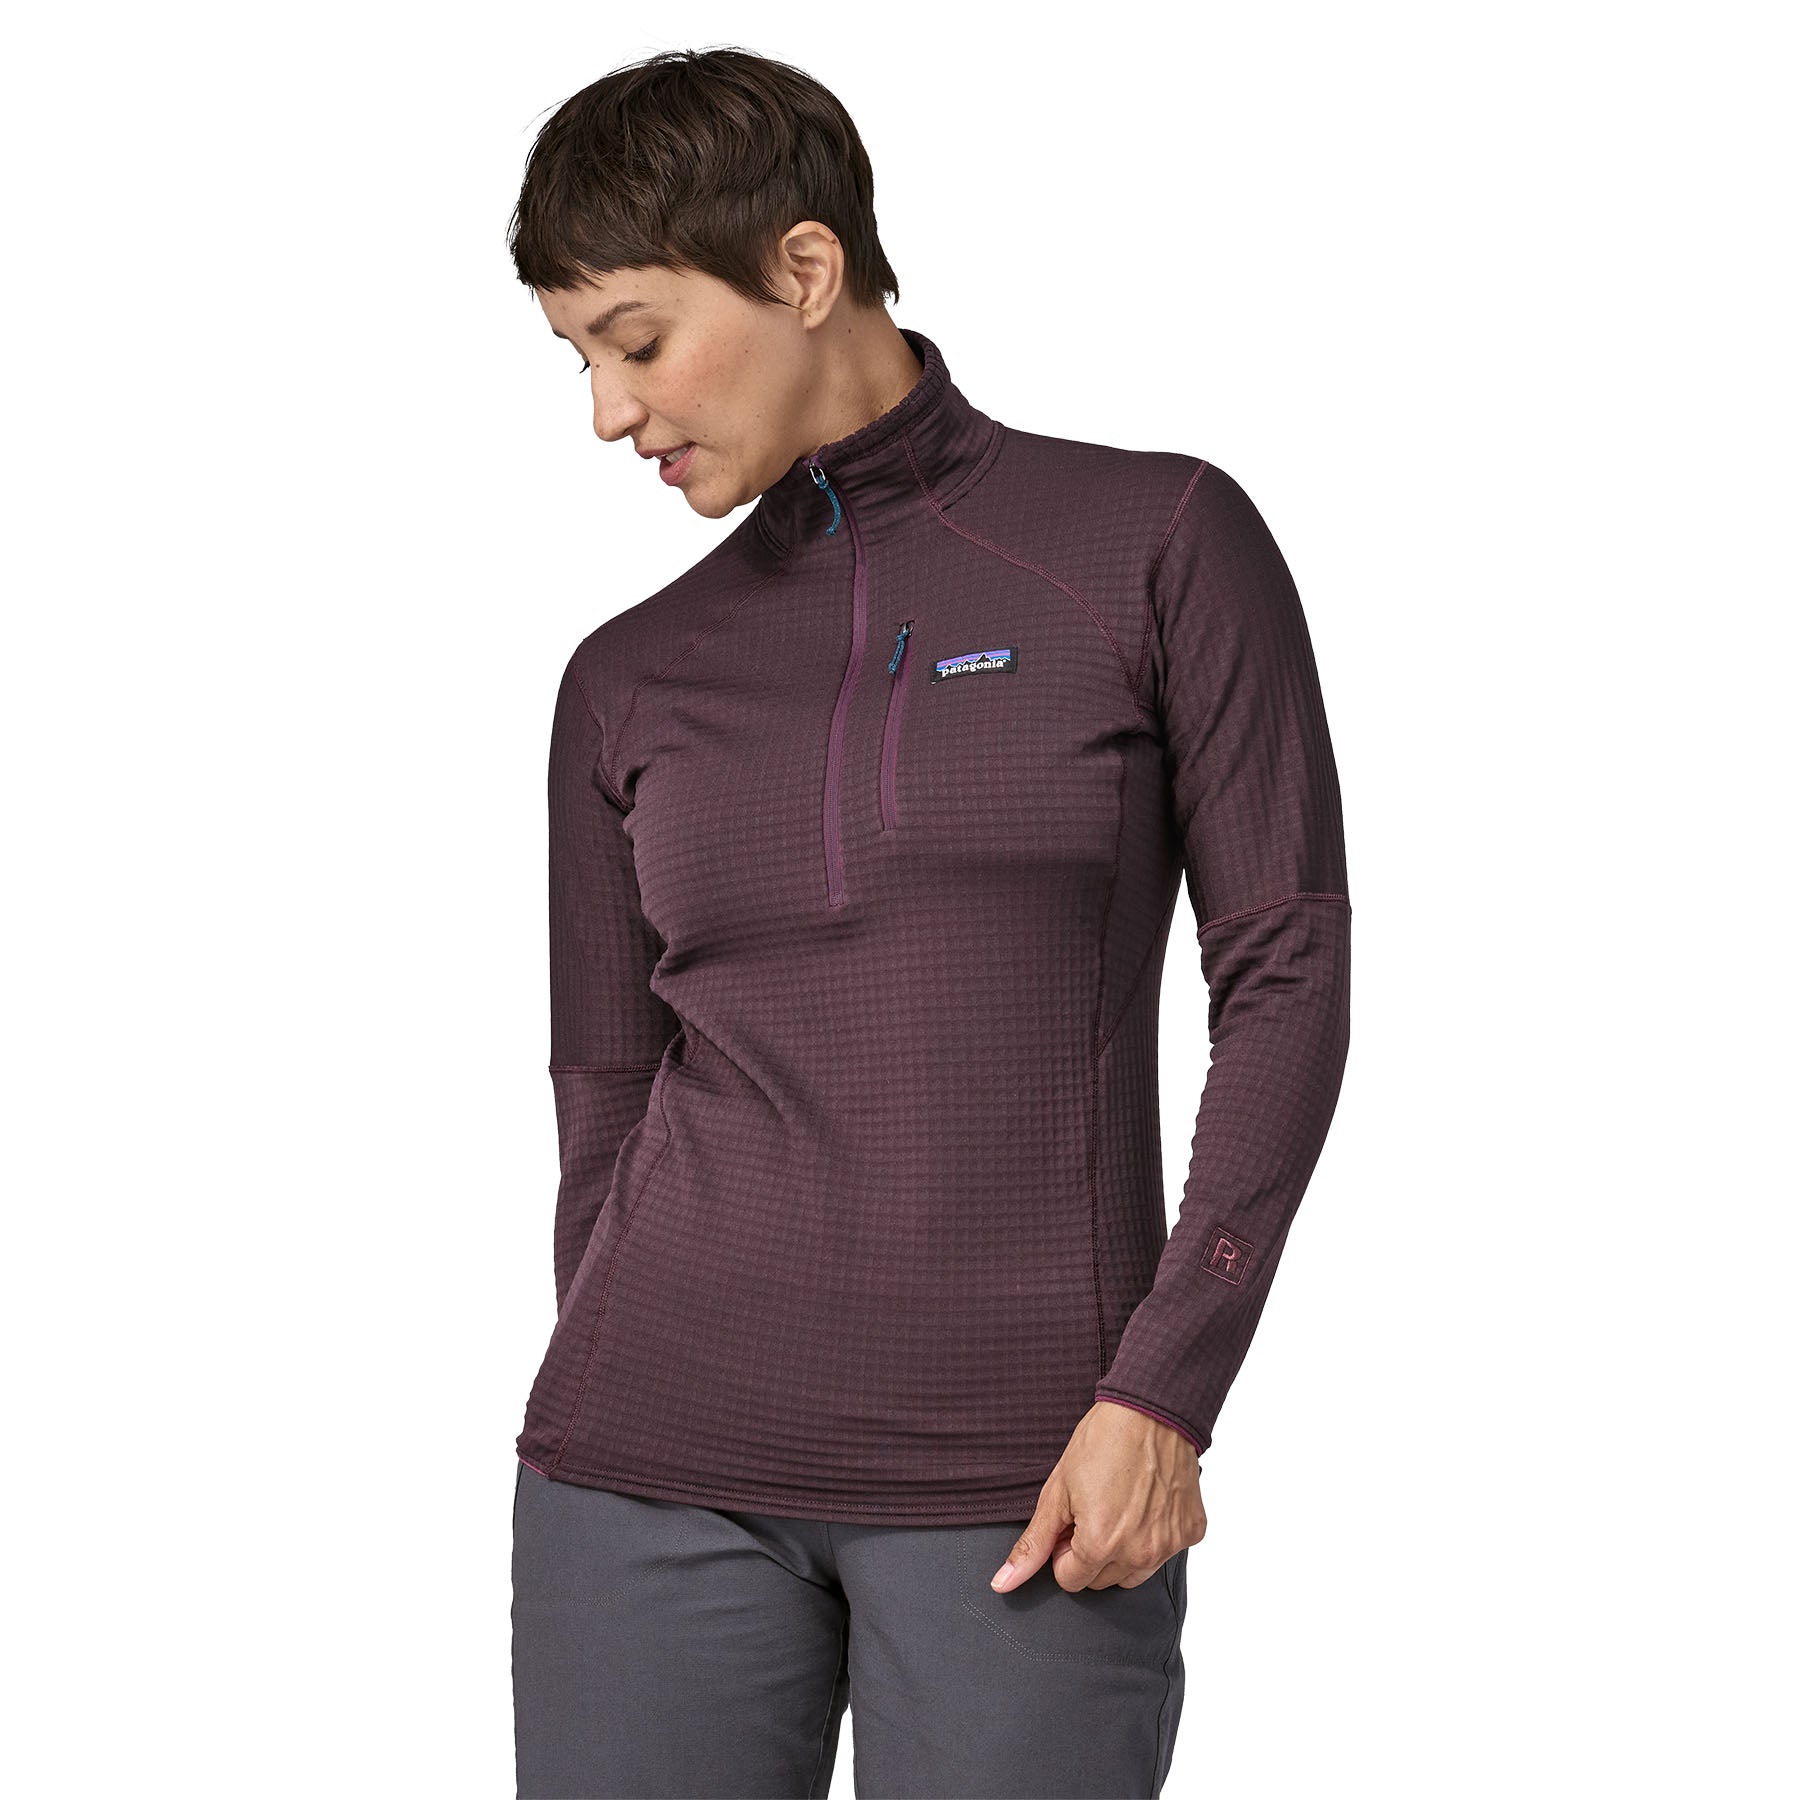 Patagonia R1 Daily Zip-Neck Pullover - Women's